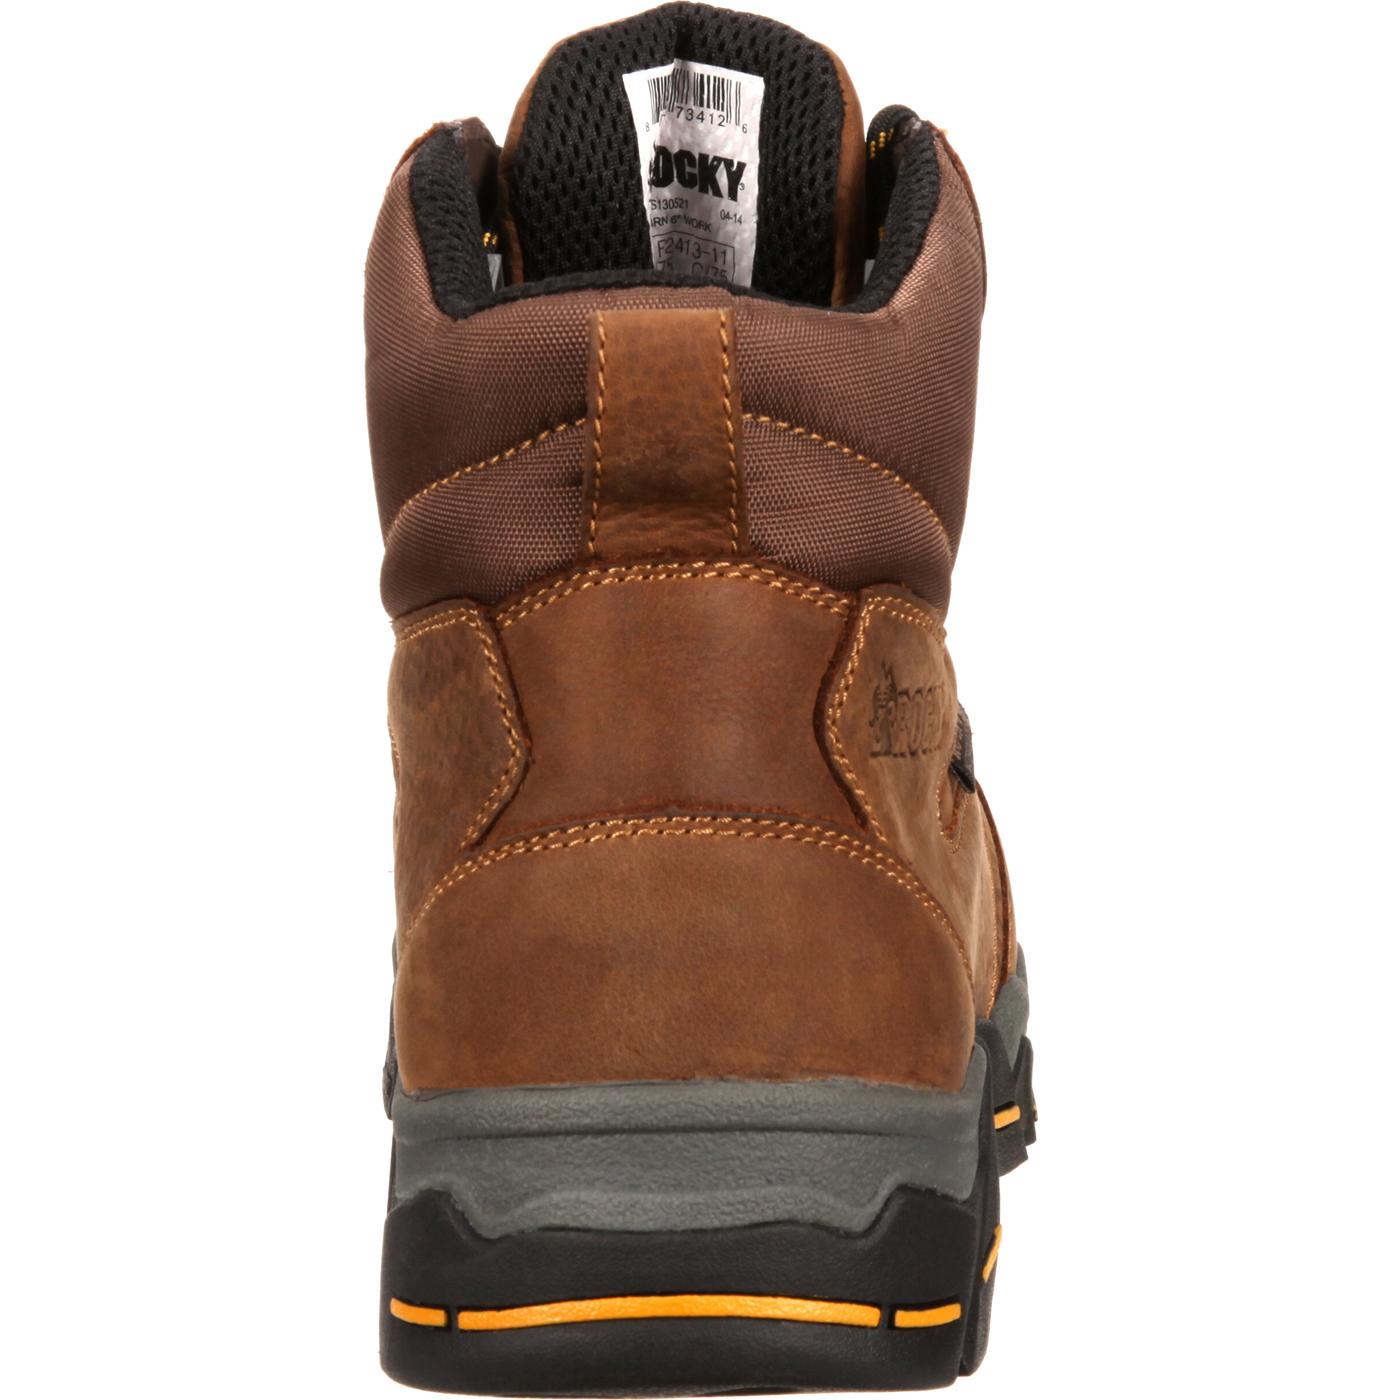 Puncture-Resistant Waterproof Work Boot, Rocky Nail Guard